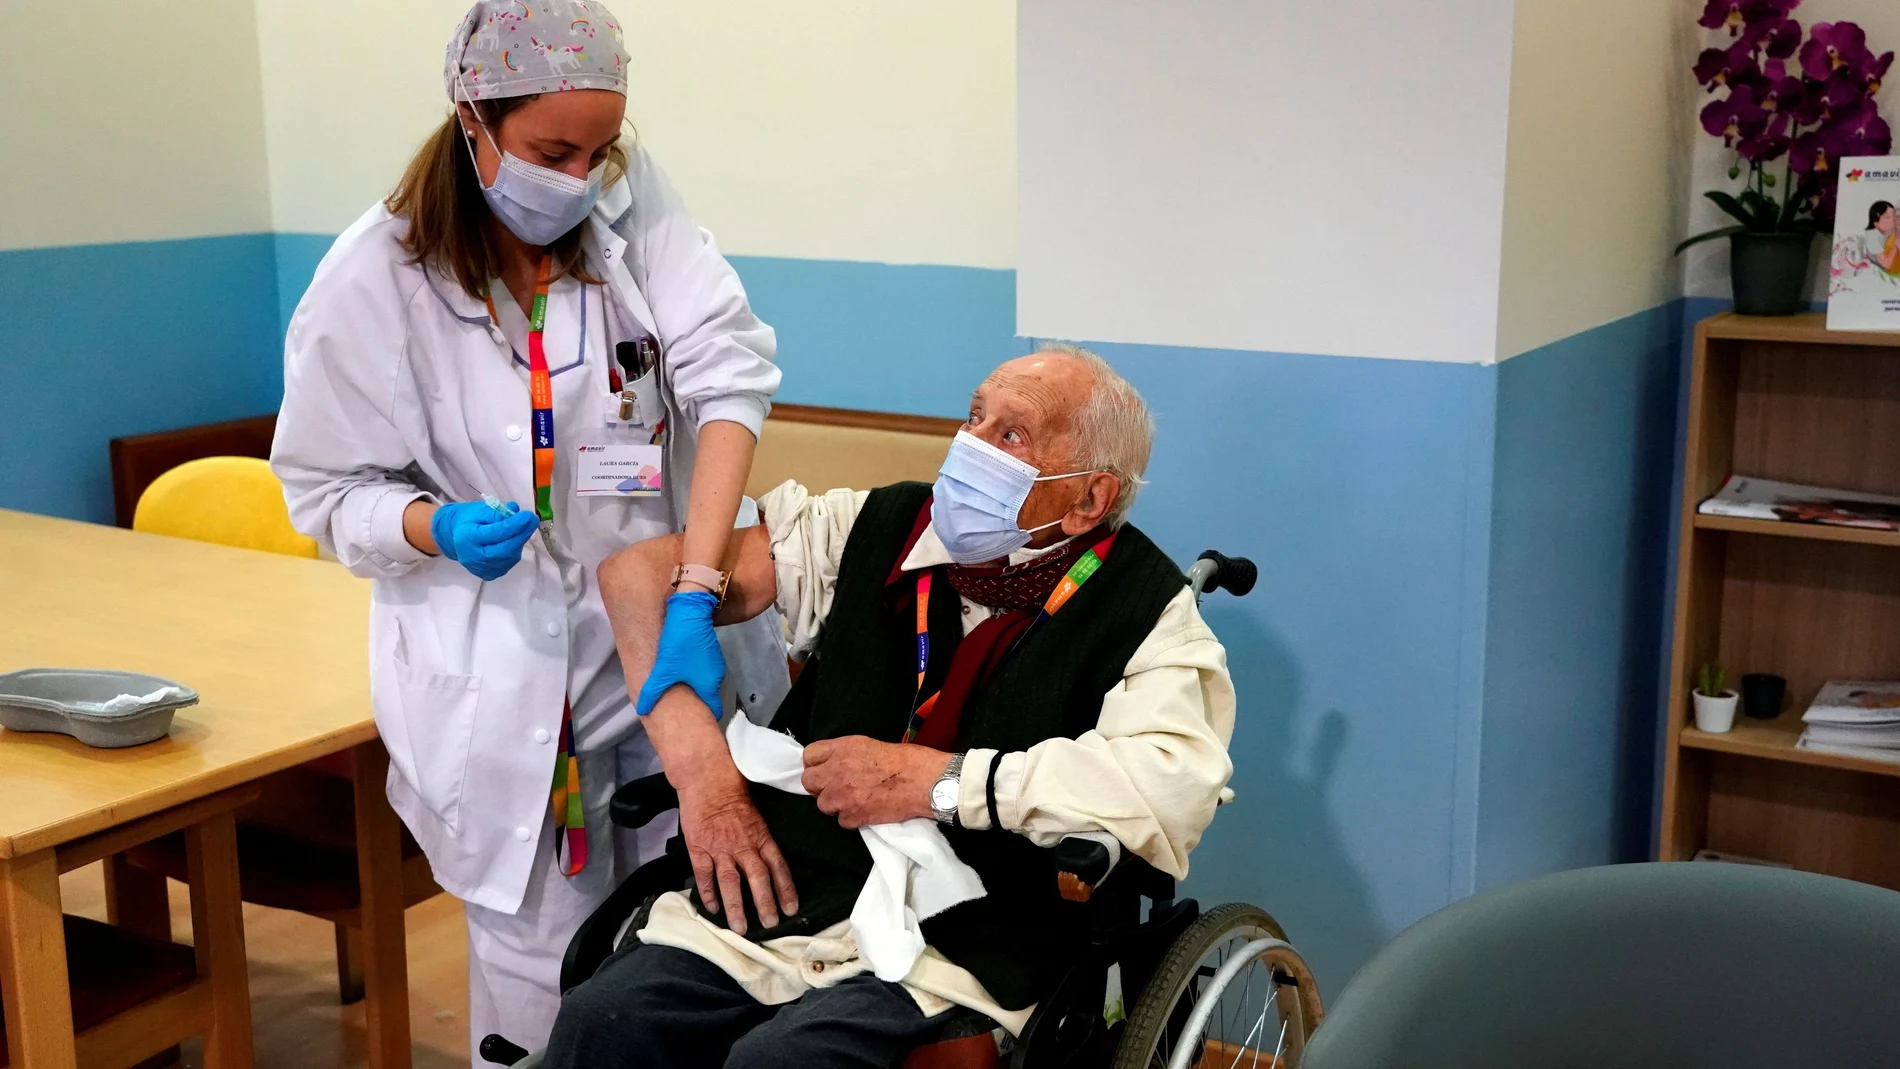 FILE PHOTO: Amavir nursing home resident Jose de Pablo, 96, receives an injection with a dose of the Pfizer-BioNTech COVID-19 vaccine, as the coronavirus disease (COVID-19) outbreak continues, in Madrid, Spain, December 30, 2020. REUTERS/Juan Medina/File Photo